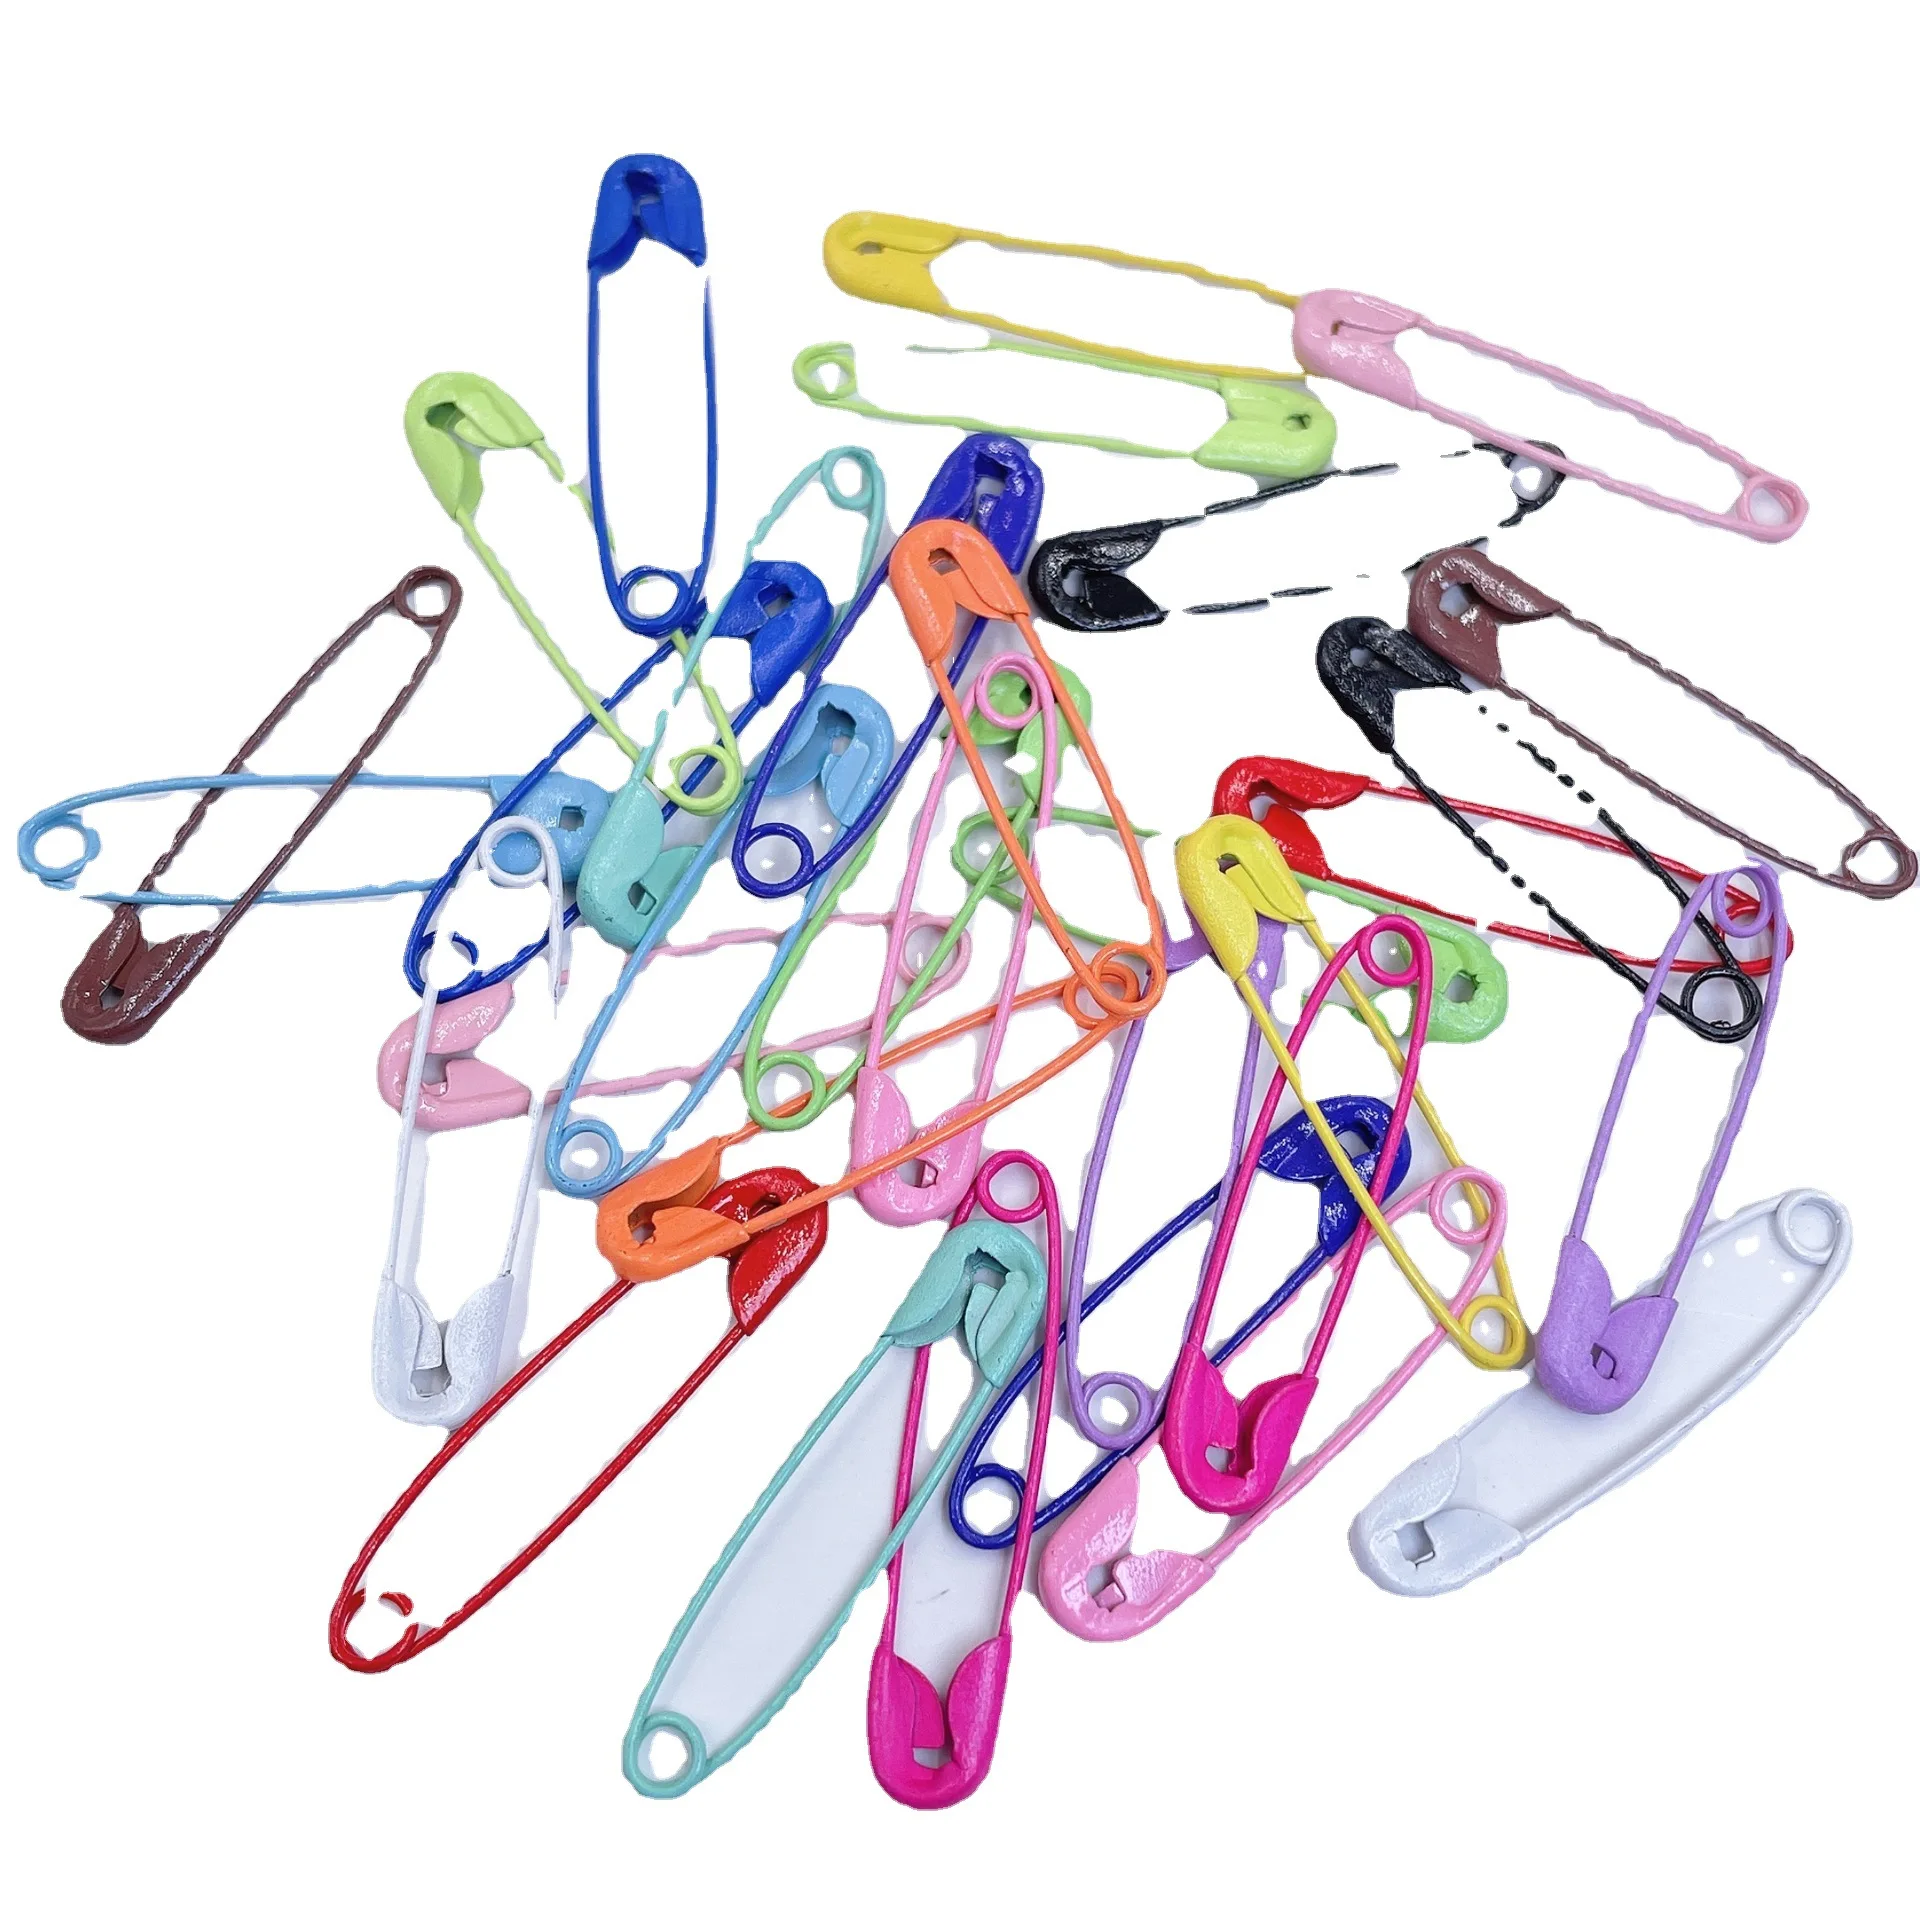 

100pcs/bag Colorful Safety Pins DIY Sewing Tools Accessory Needles Large Safety Pin Small Brooch Apparel Accessories